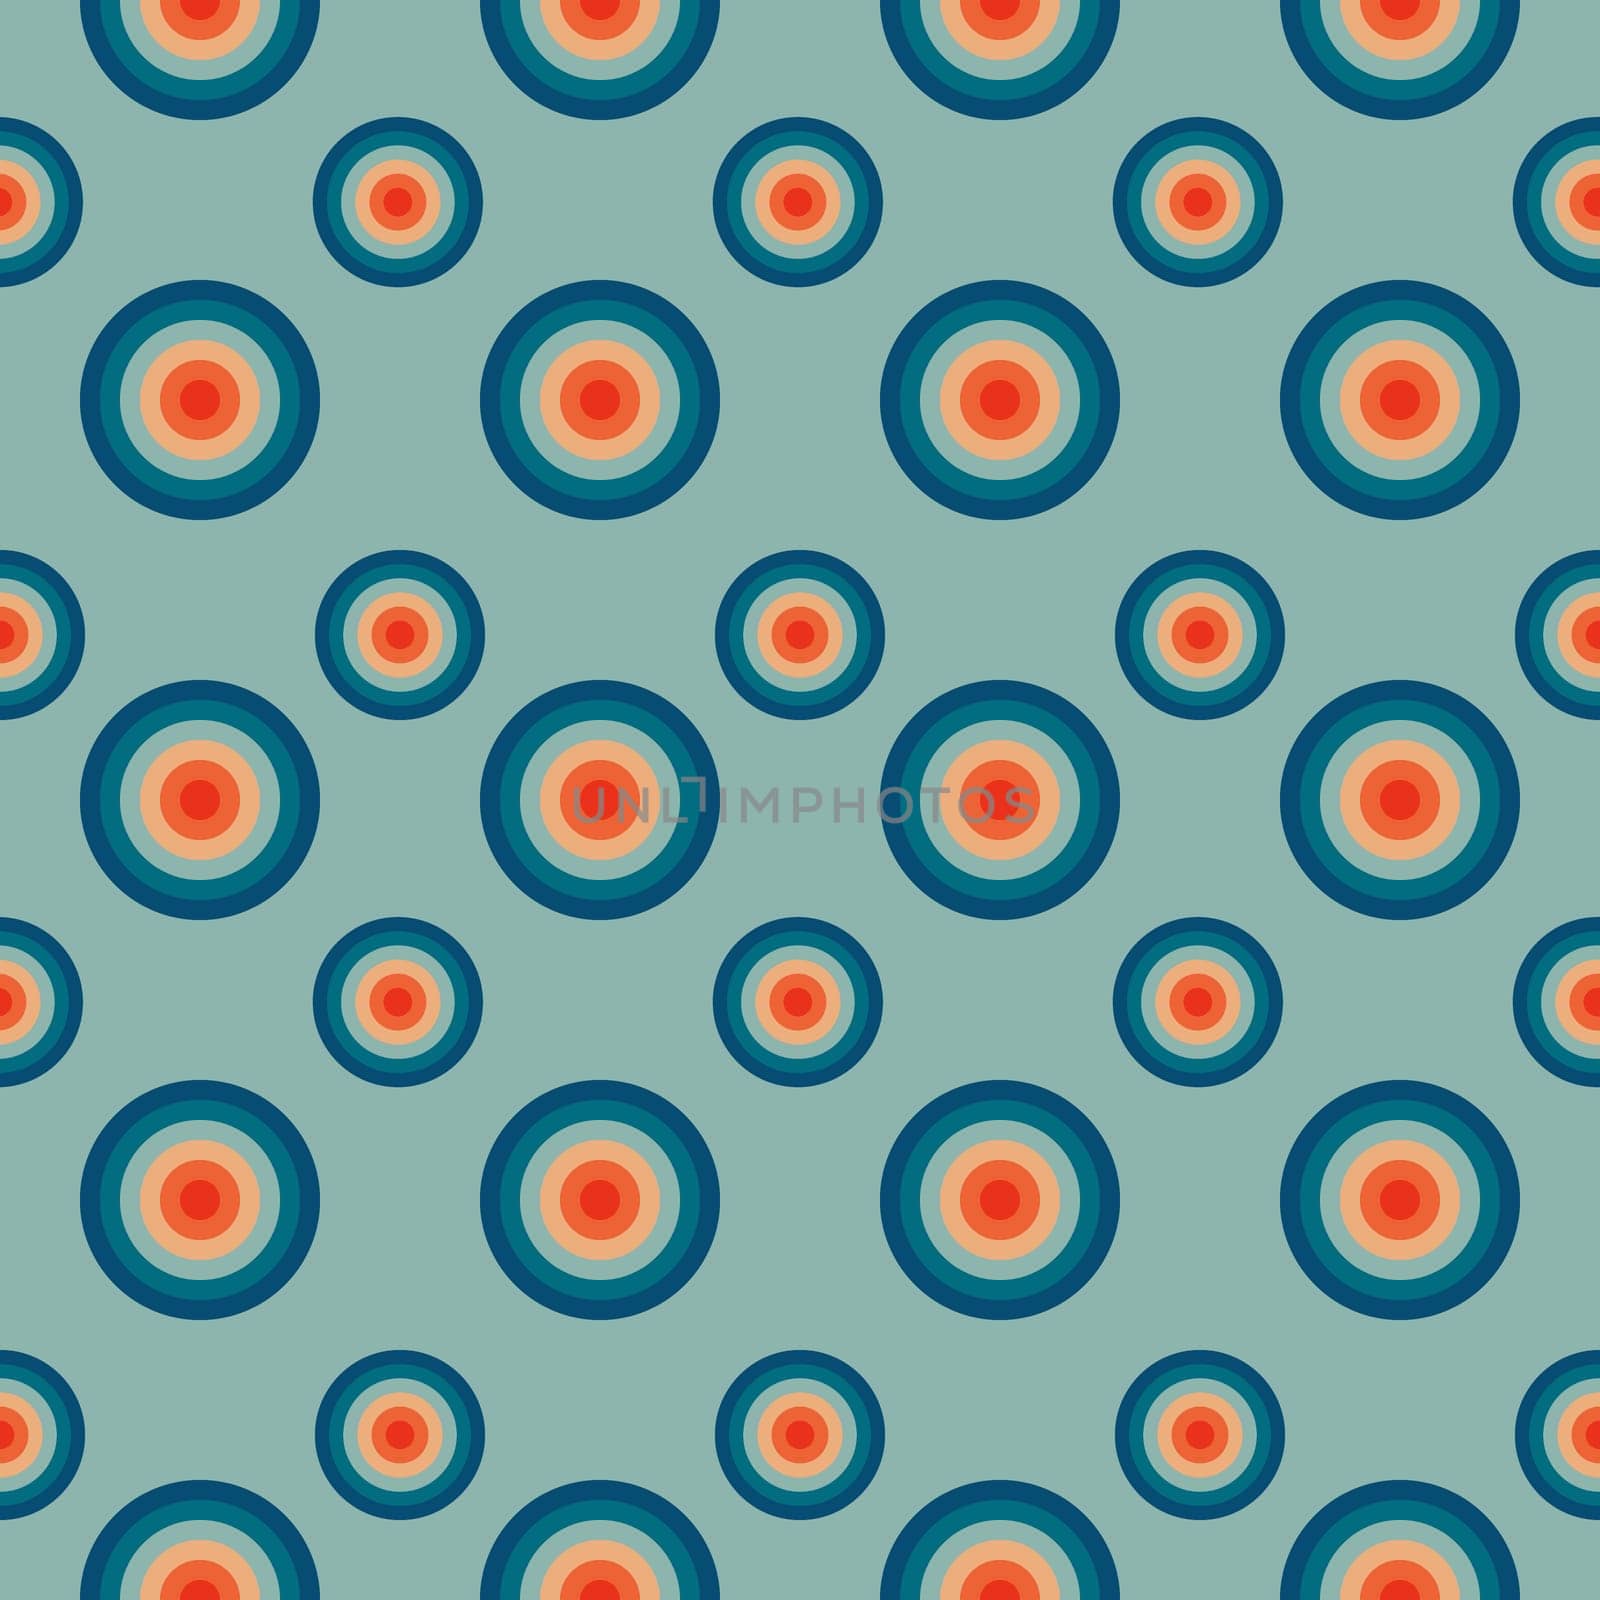 Seamless Vintage pattern with circles in the style of the 70s and 60s.